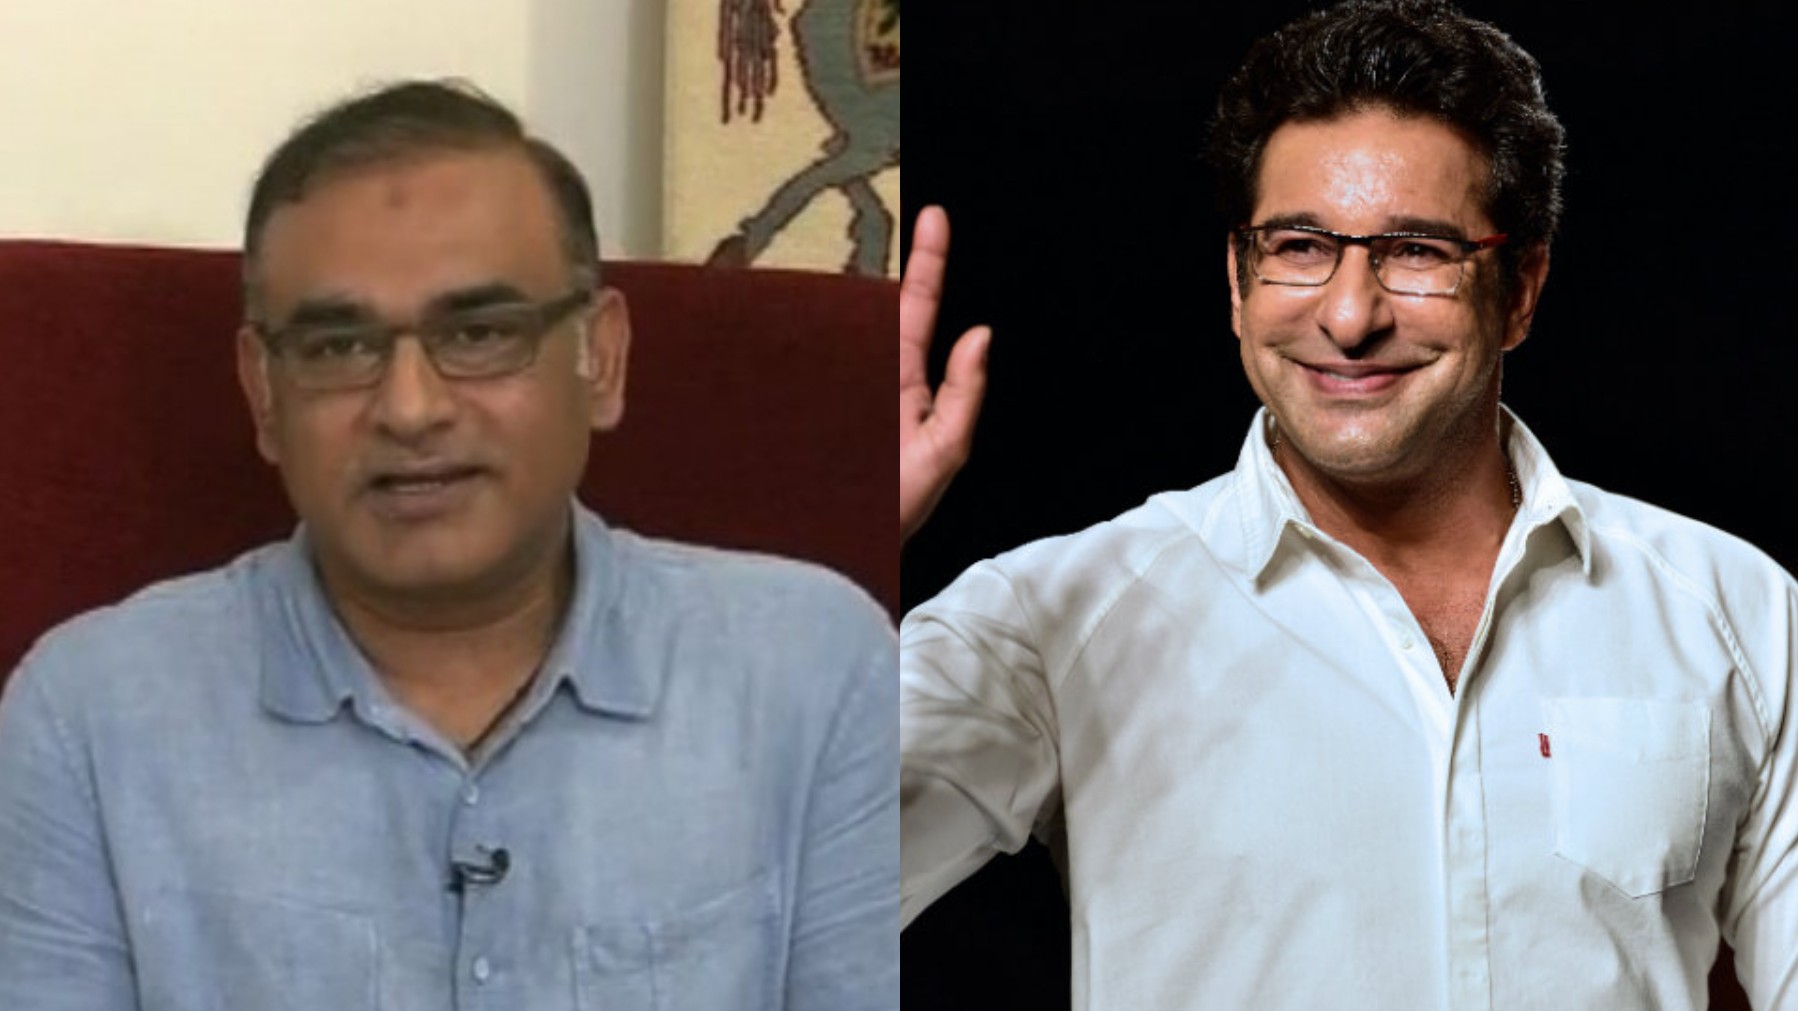 Aamer Sohail alleges Wasim Akram made sure Pakistan didn’t win 1996, 1999 and 2003 World Cups